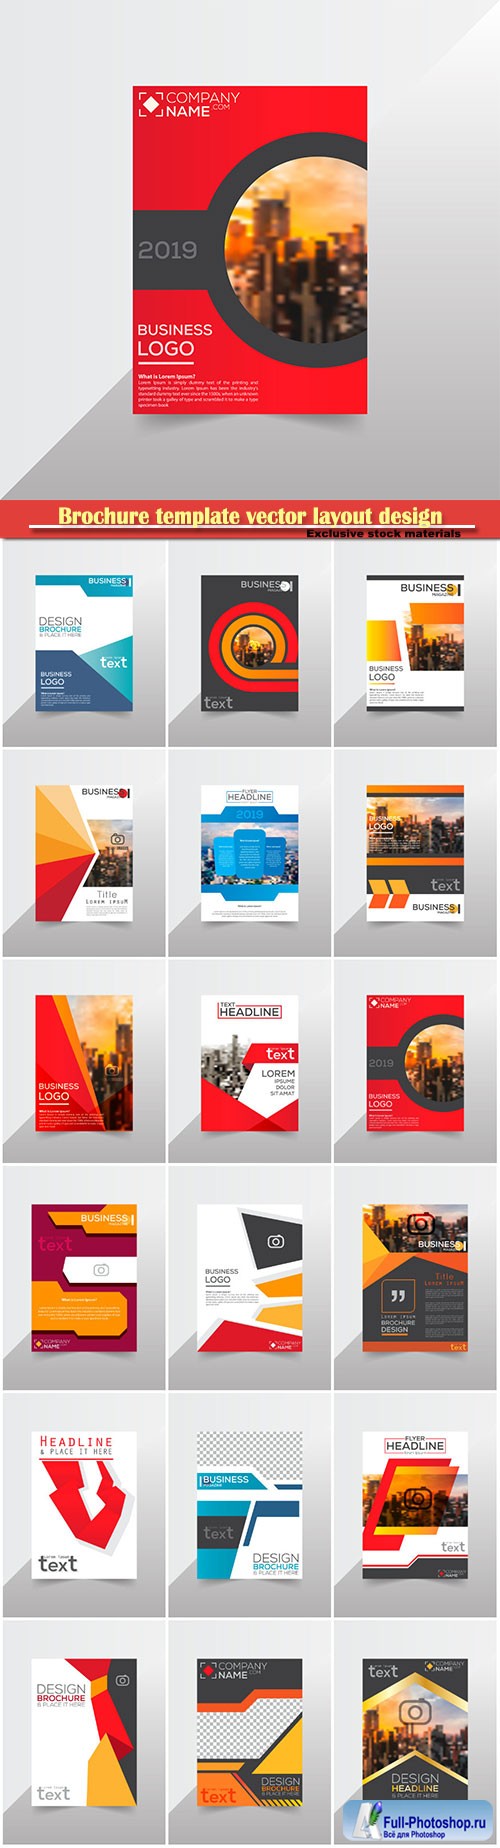 Brochure template vector layout design, corporate business annual report, magazine, flyer mockup # 217